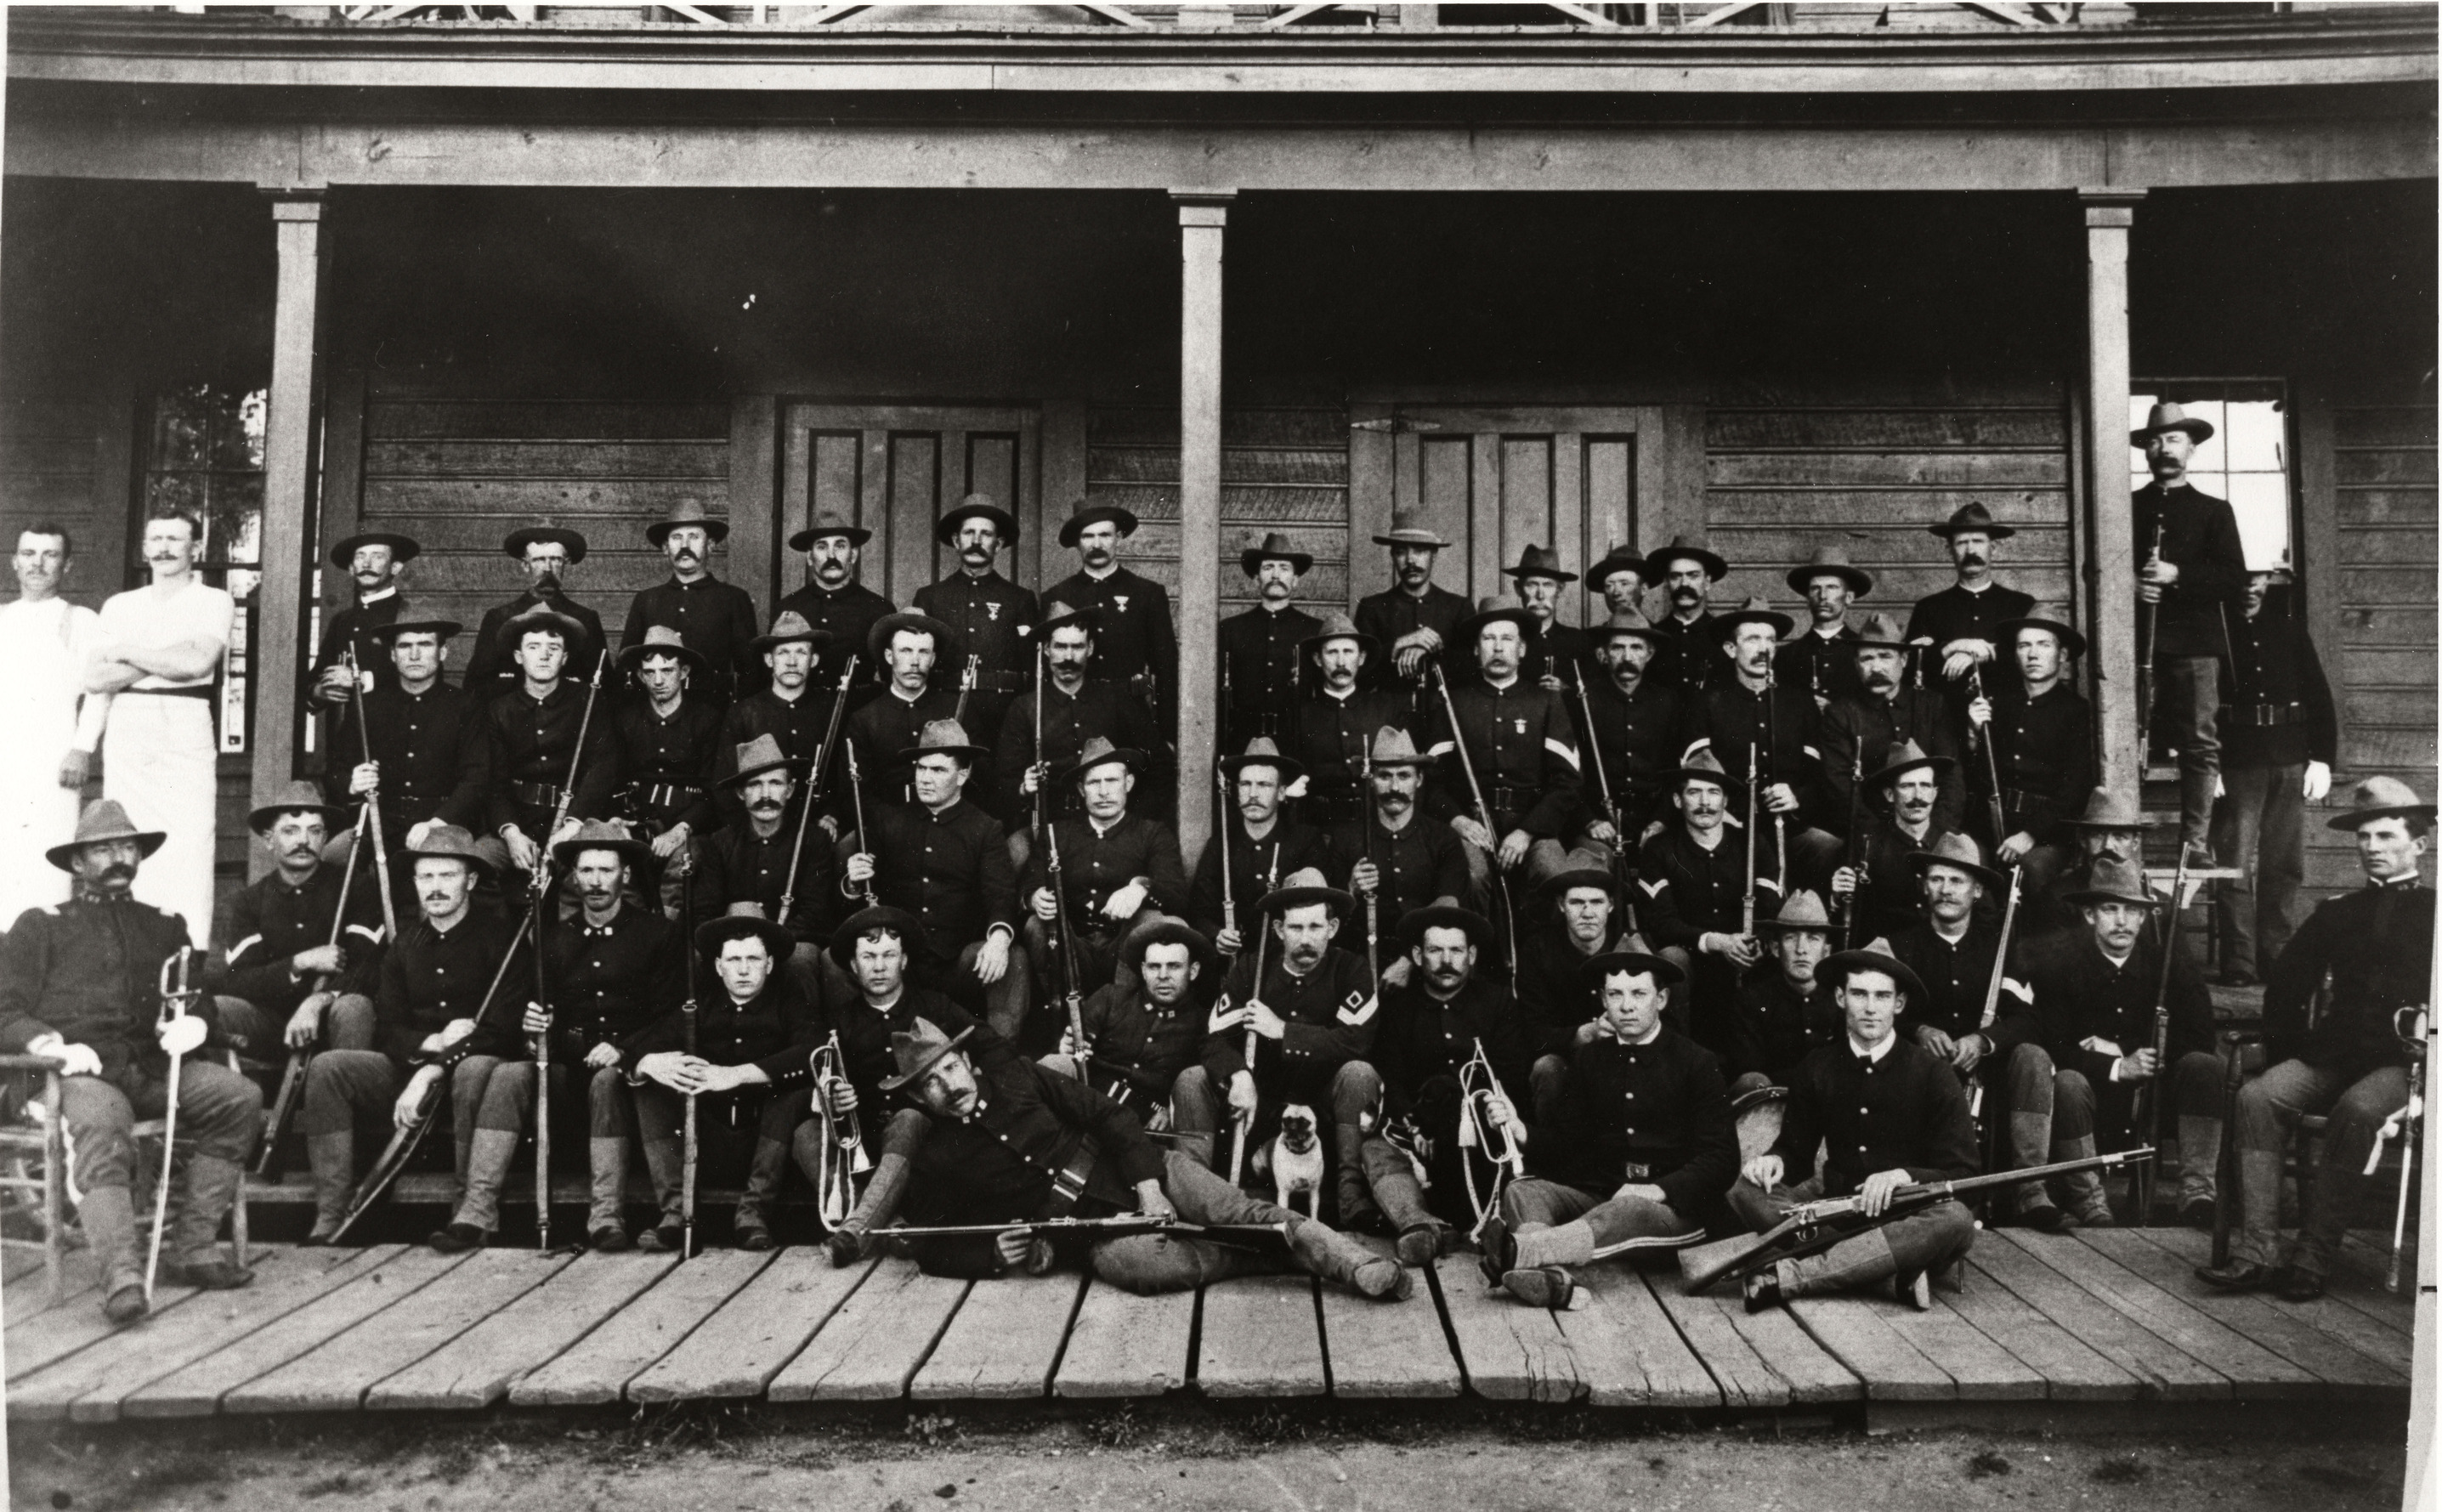 Black and white photograph of rows of soldiers in uniform seated on a porch for a photo